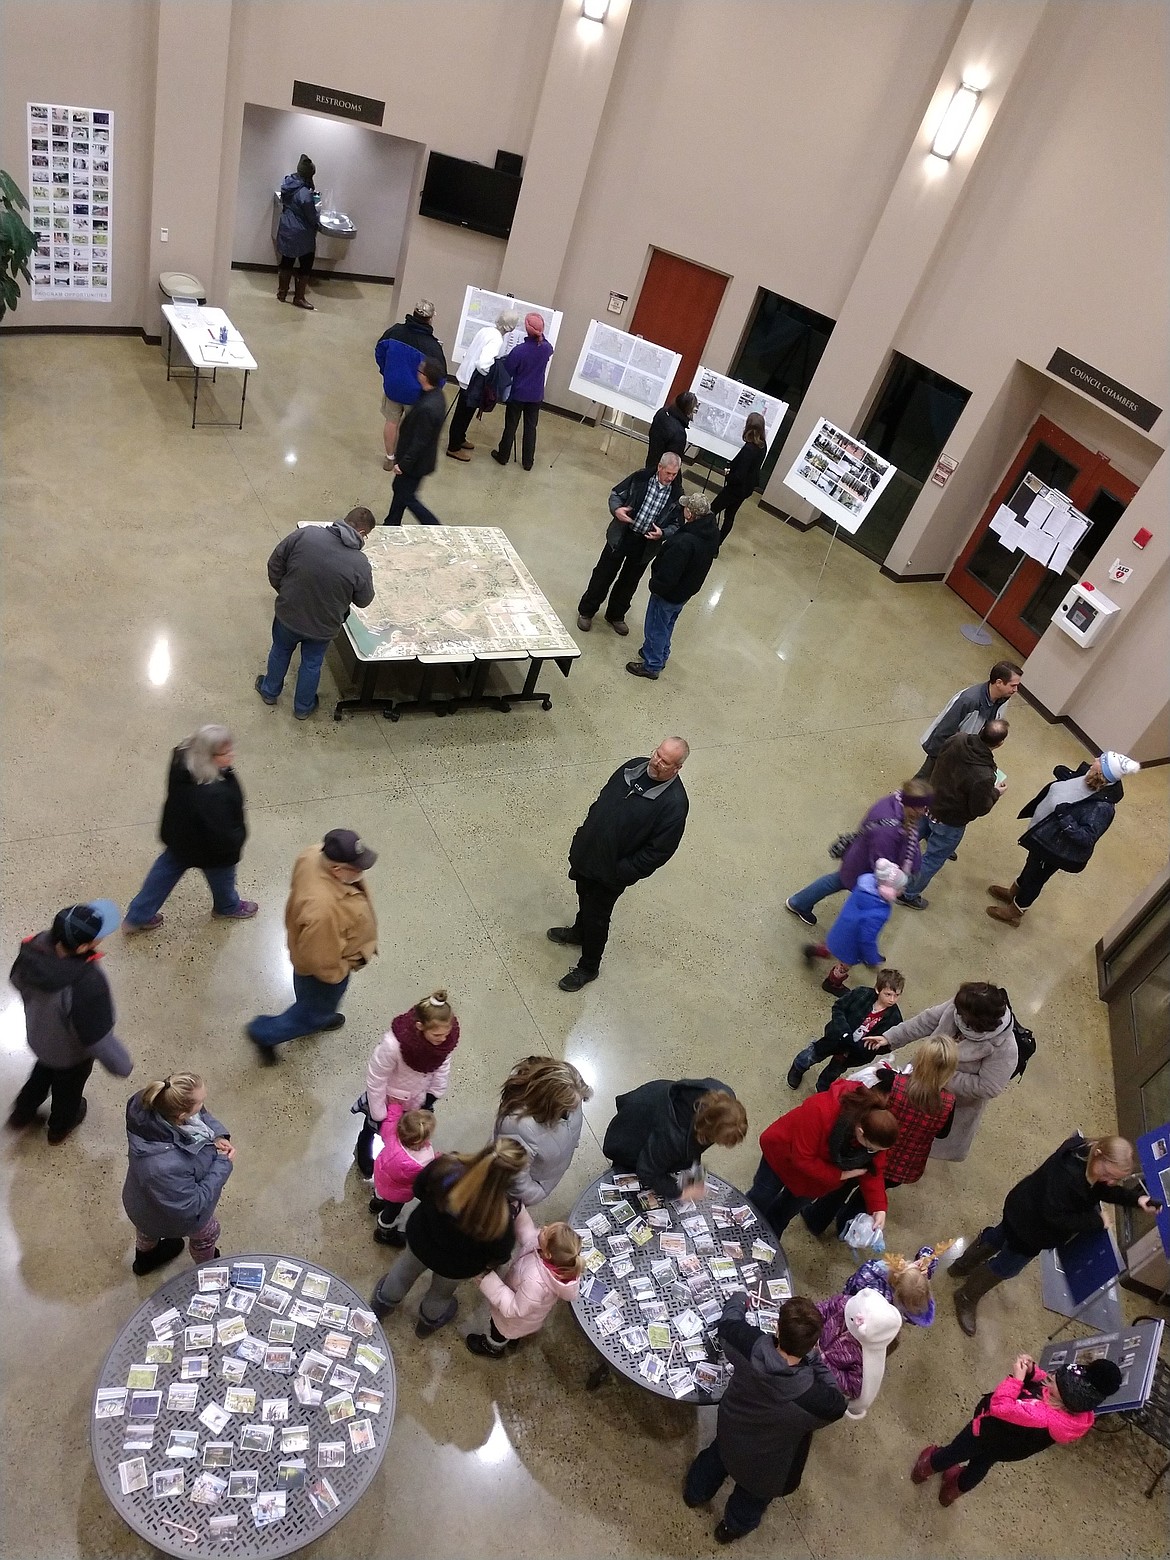 Citizens participate in a vision session for Black Bay Park at City Hall in December. Presentations will be held today at 3:30 p.m., 5 p.m. and 6 p.m. at City Hall on the park plan that&#146;s being developed. Public input will be taken.

Courtesy photo